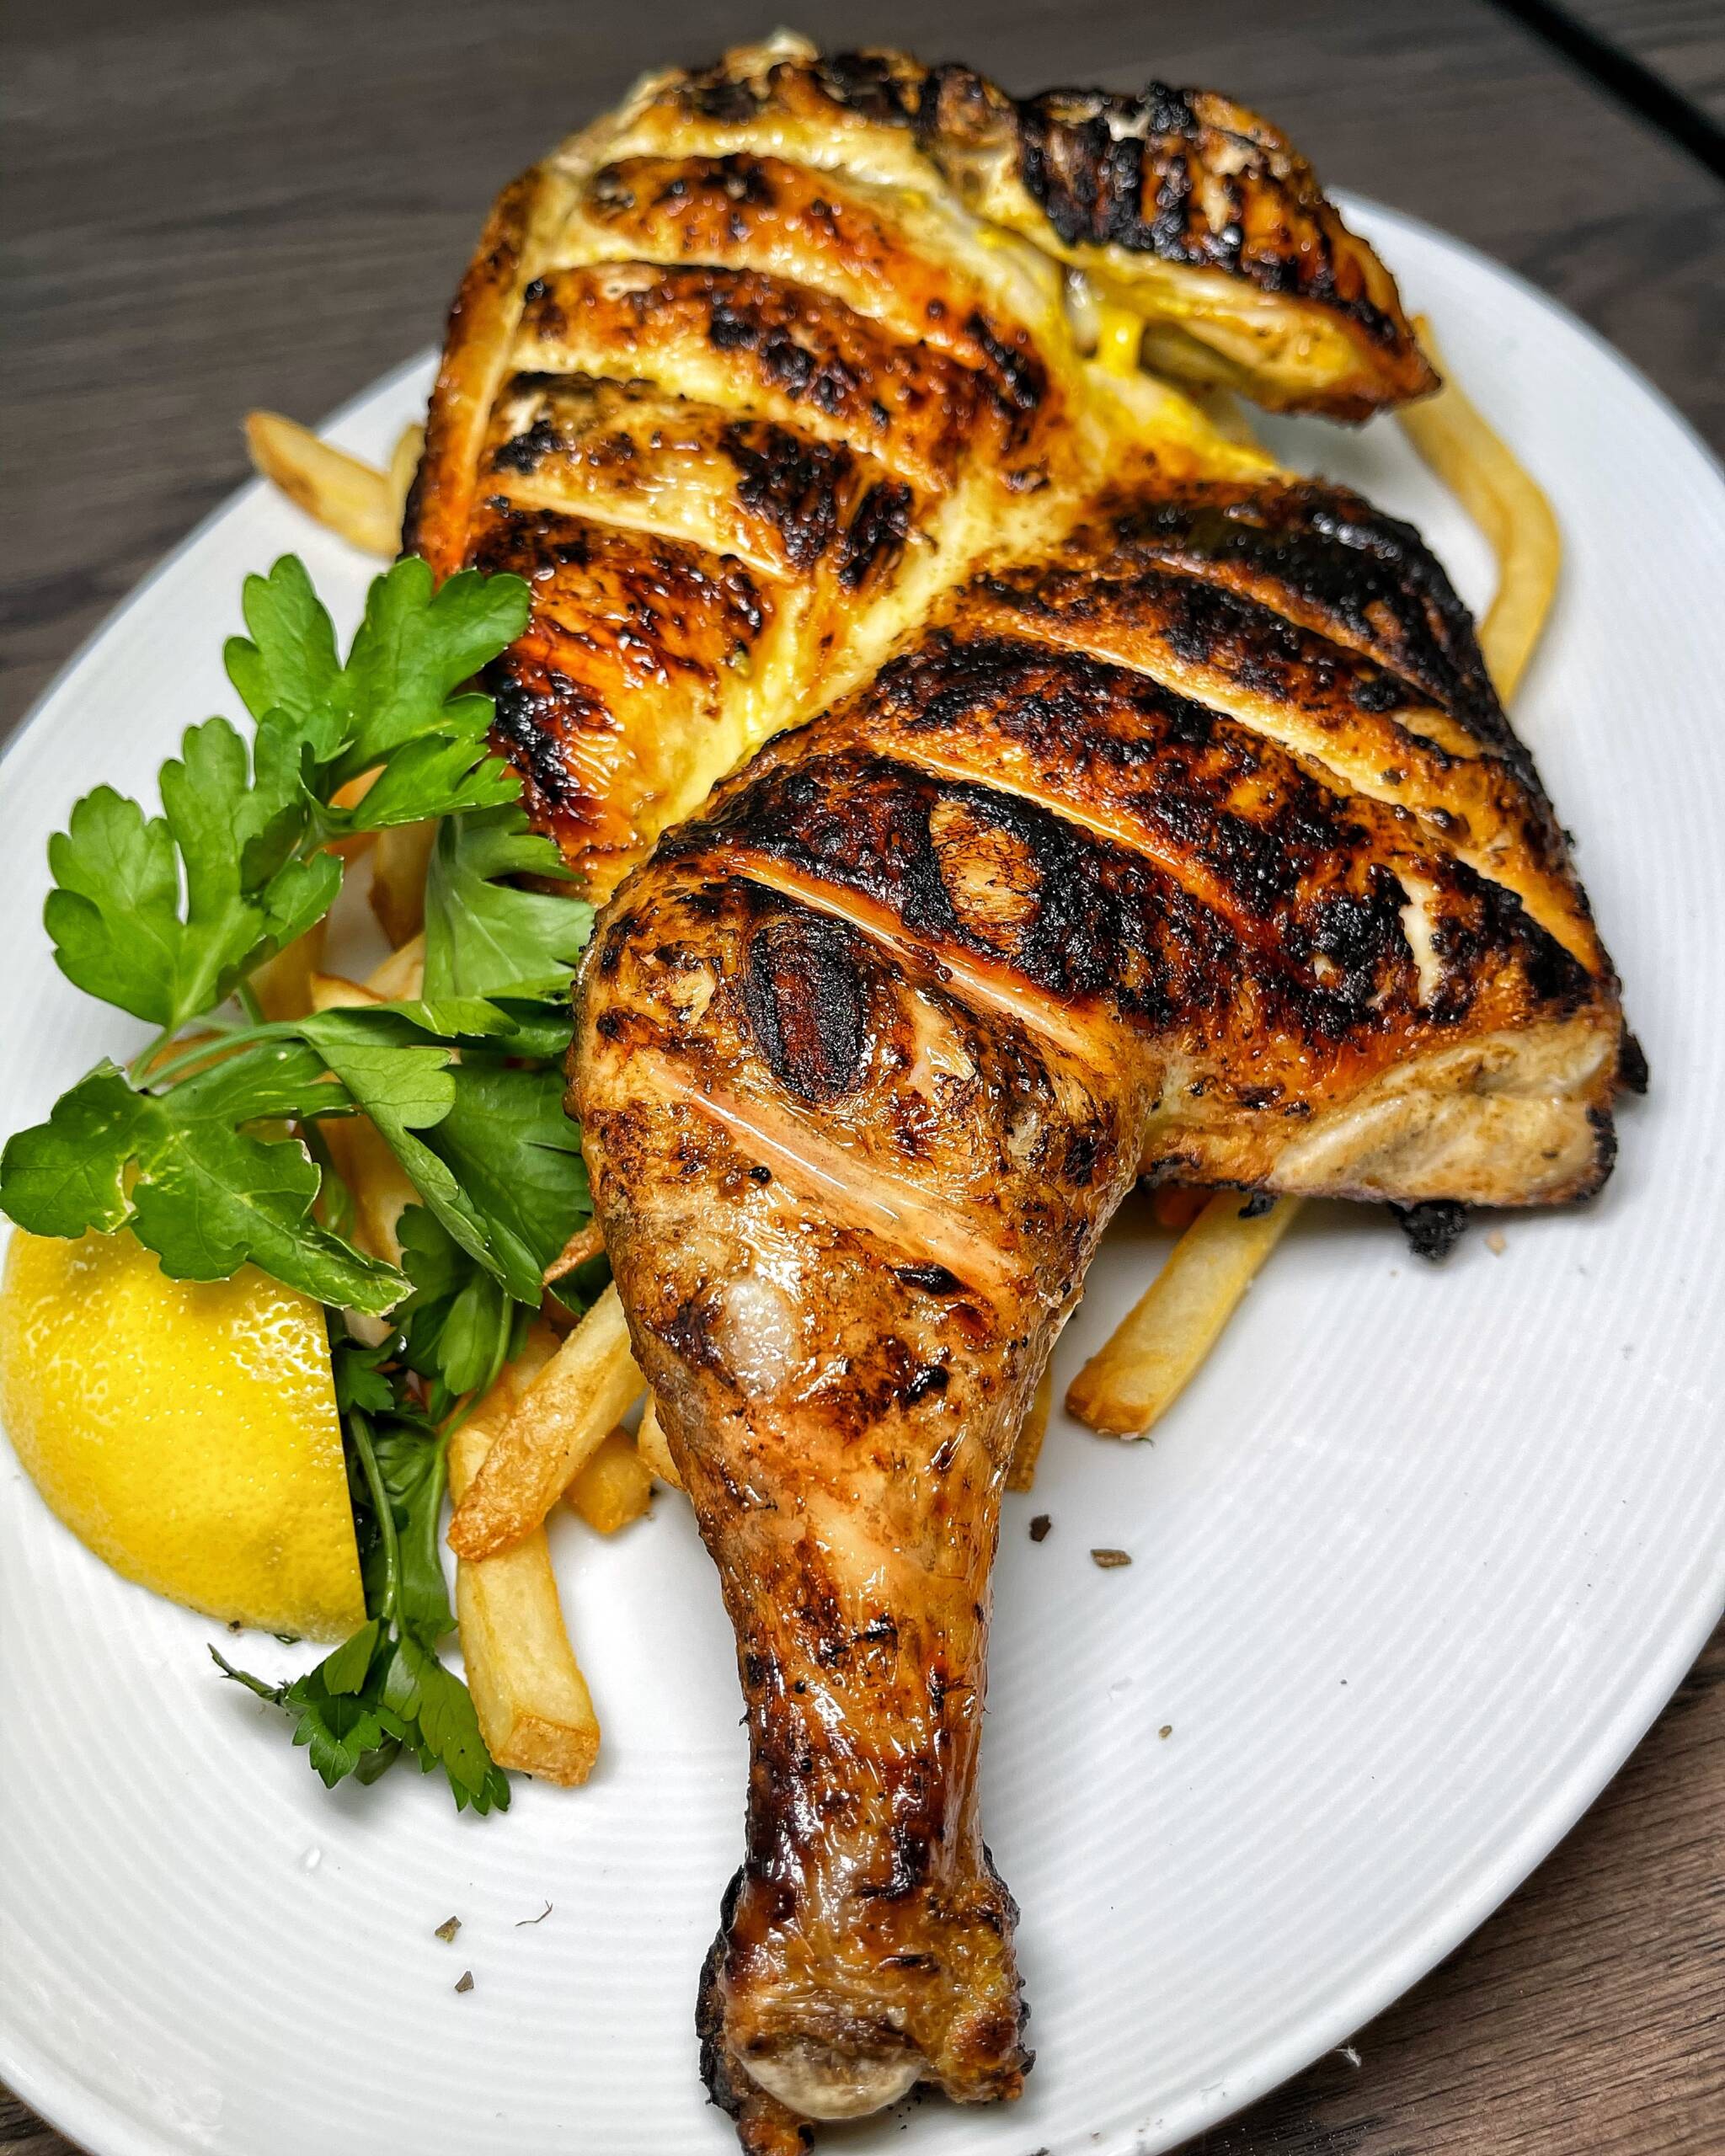 Char-broiled organic brick chicken served with hand cut fries